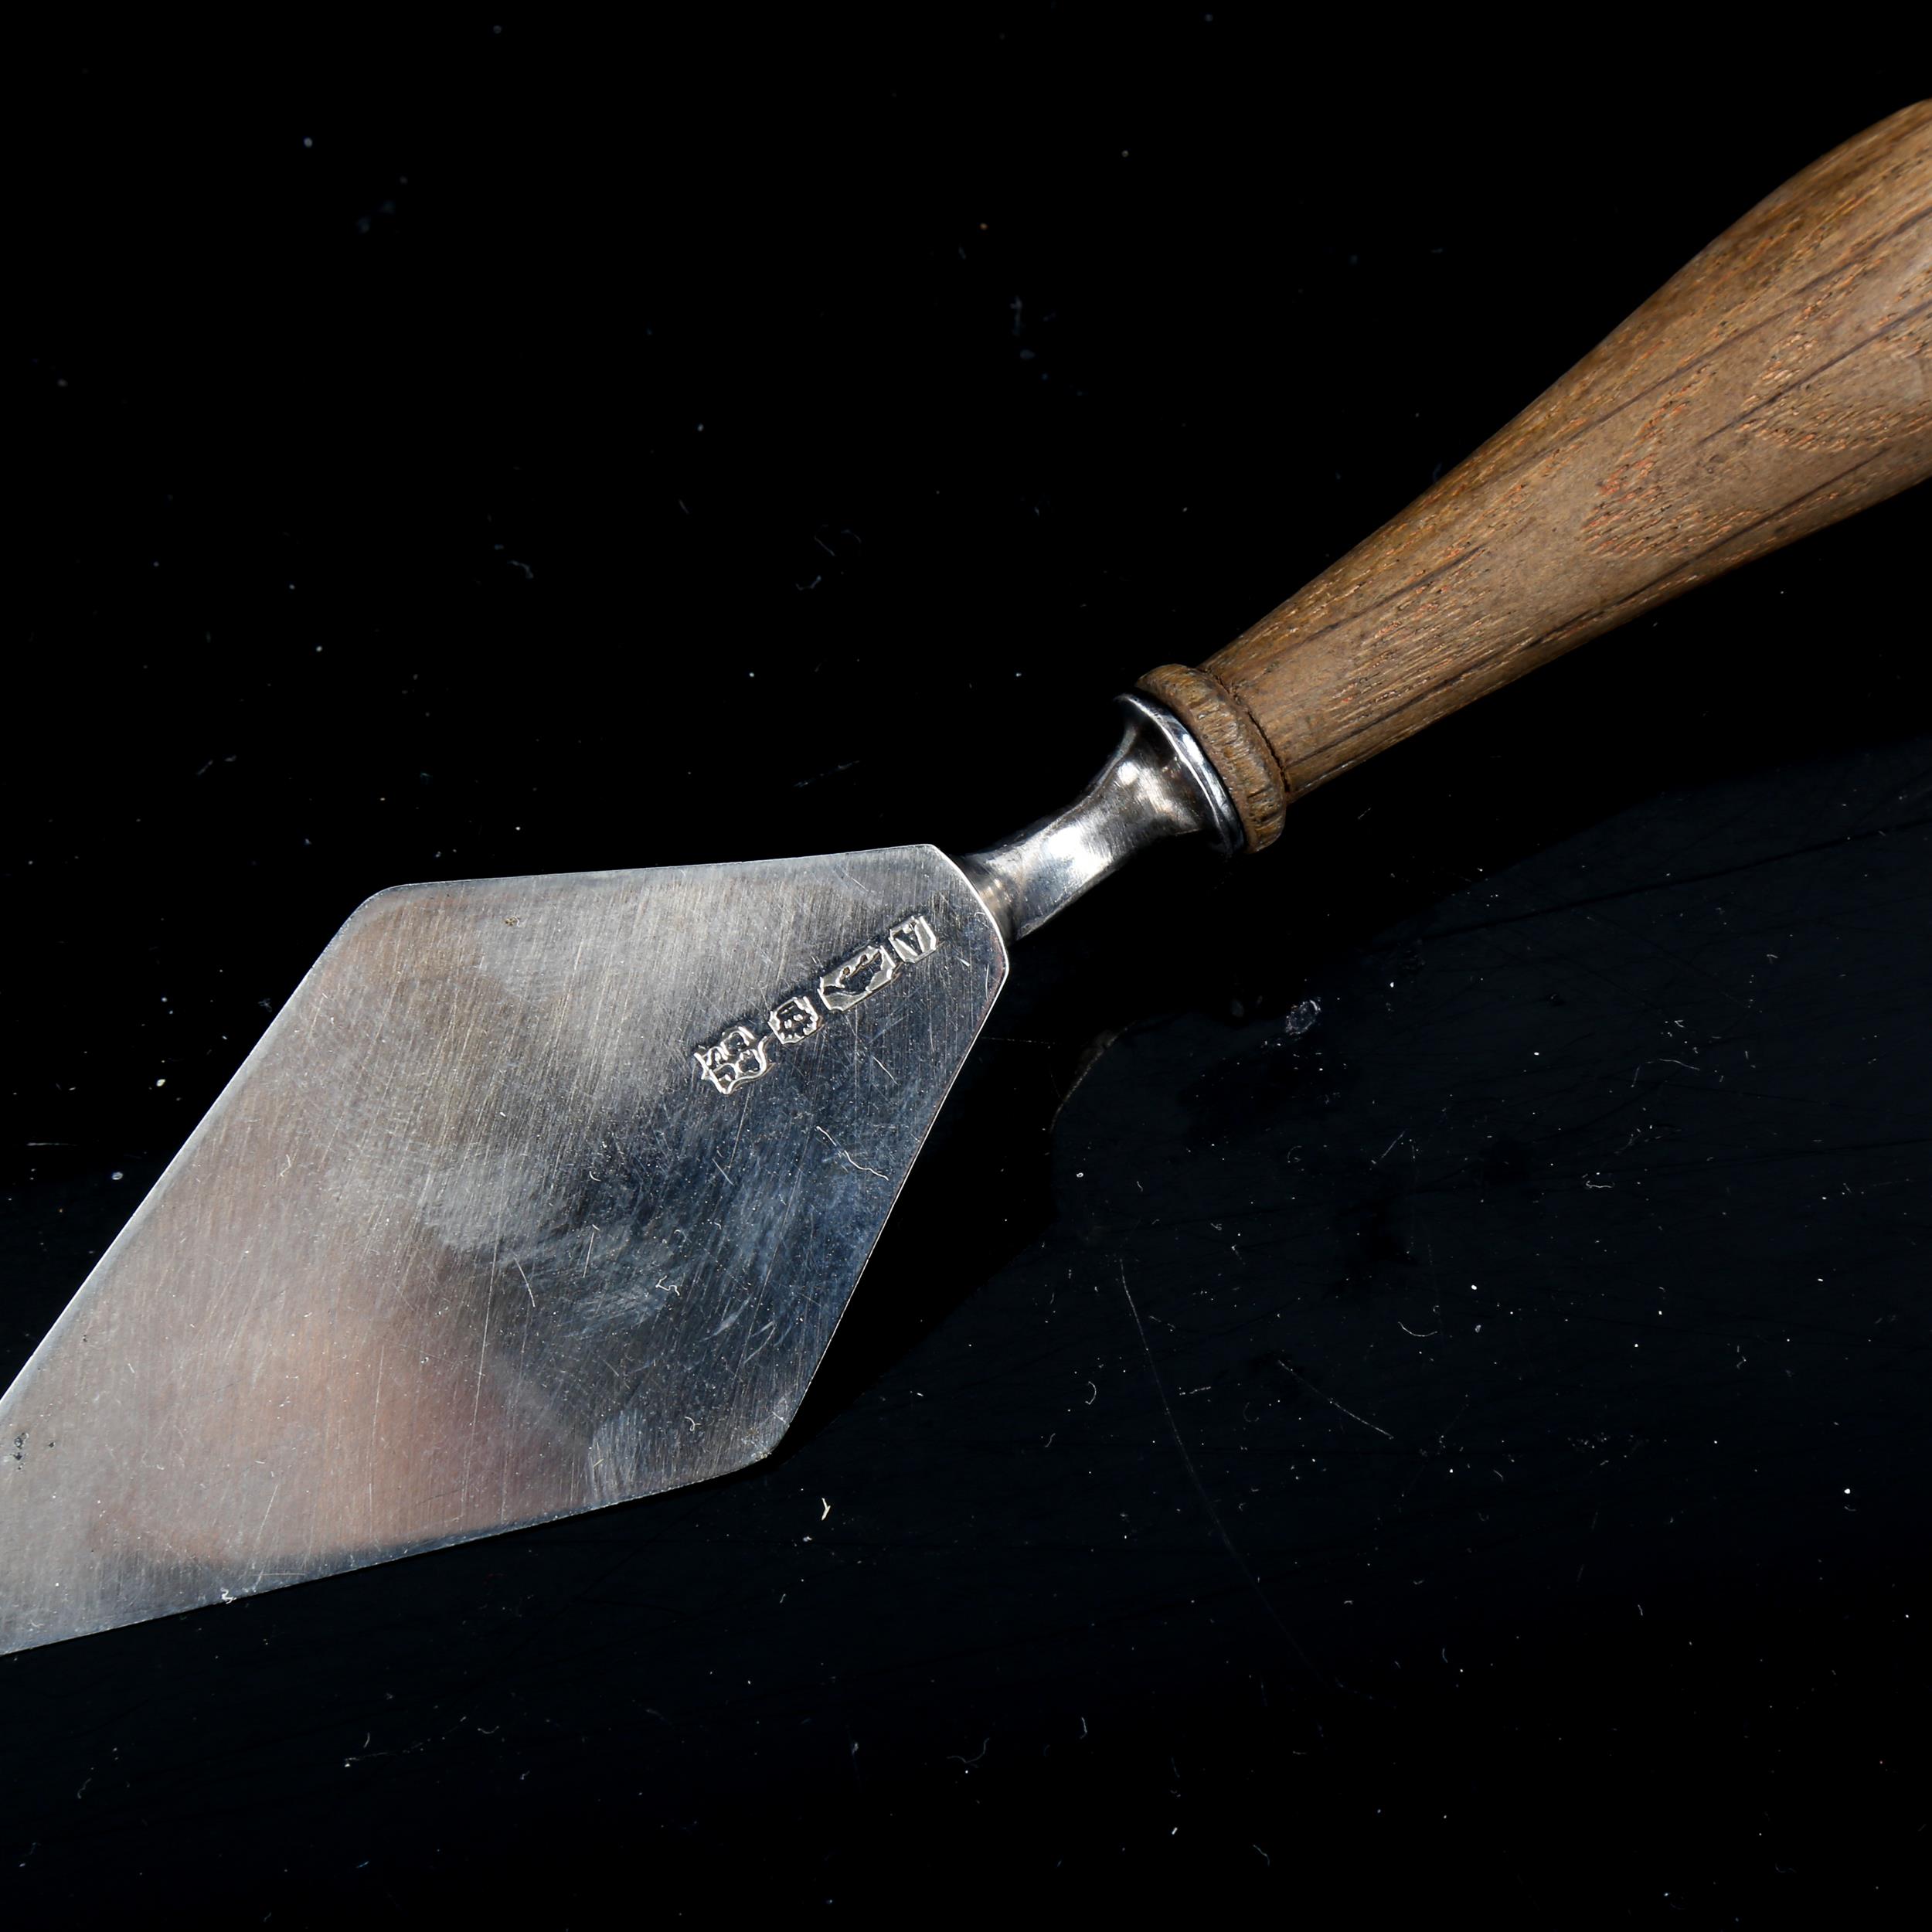 A small novelty silver plated gardening trowel, with turned wood handle, maker's marks J S and S, - Image 3 of 4